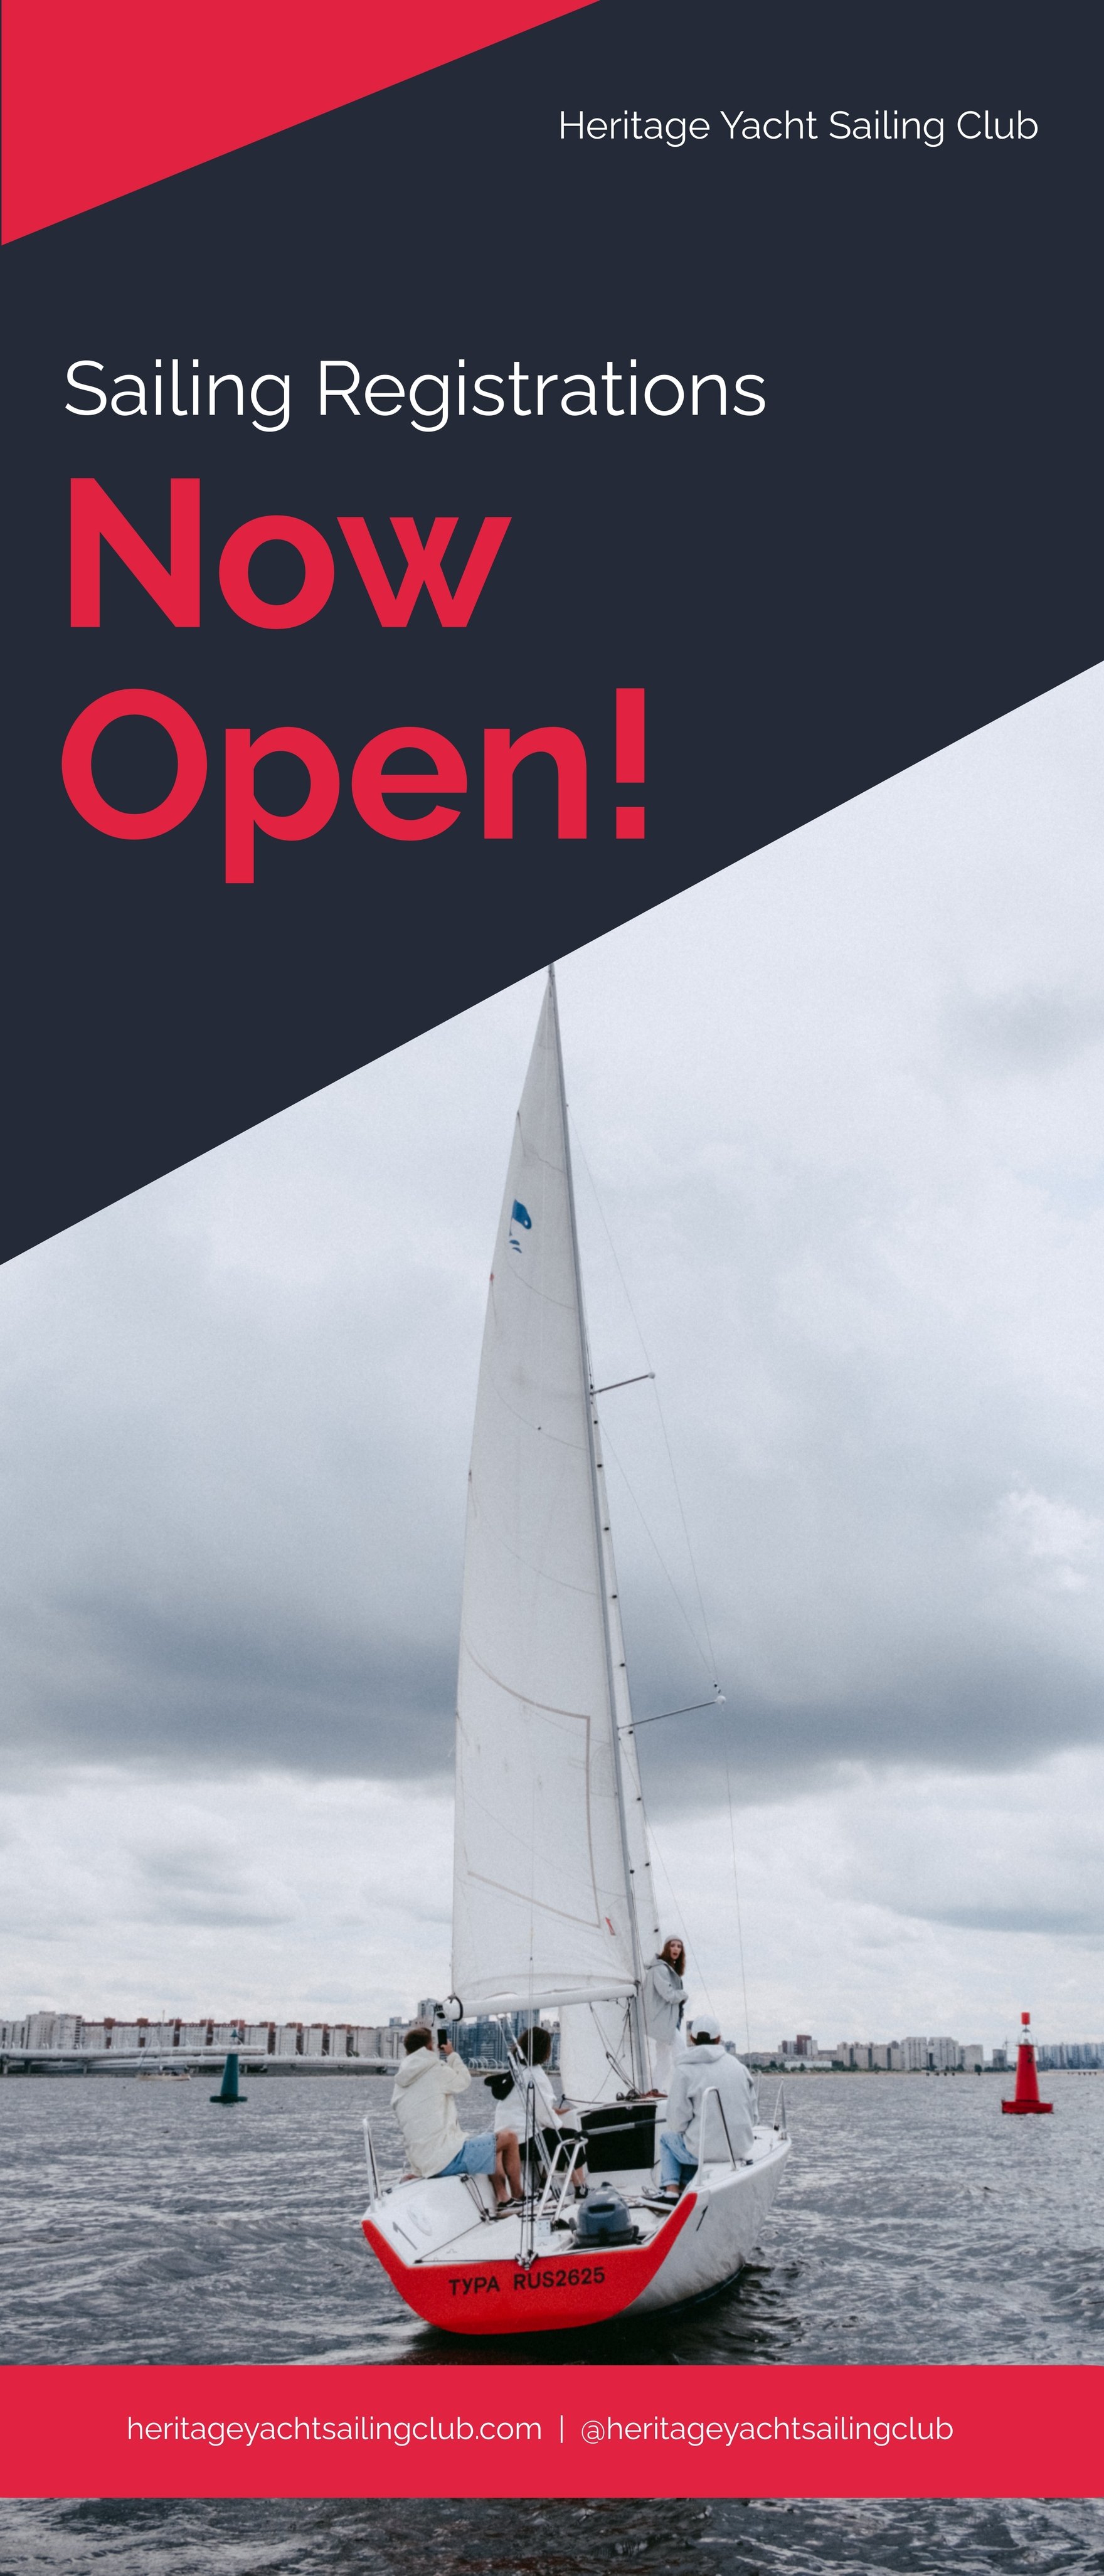 Yacht Sailing Club Rollup Banner Template